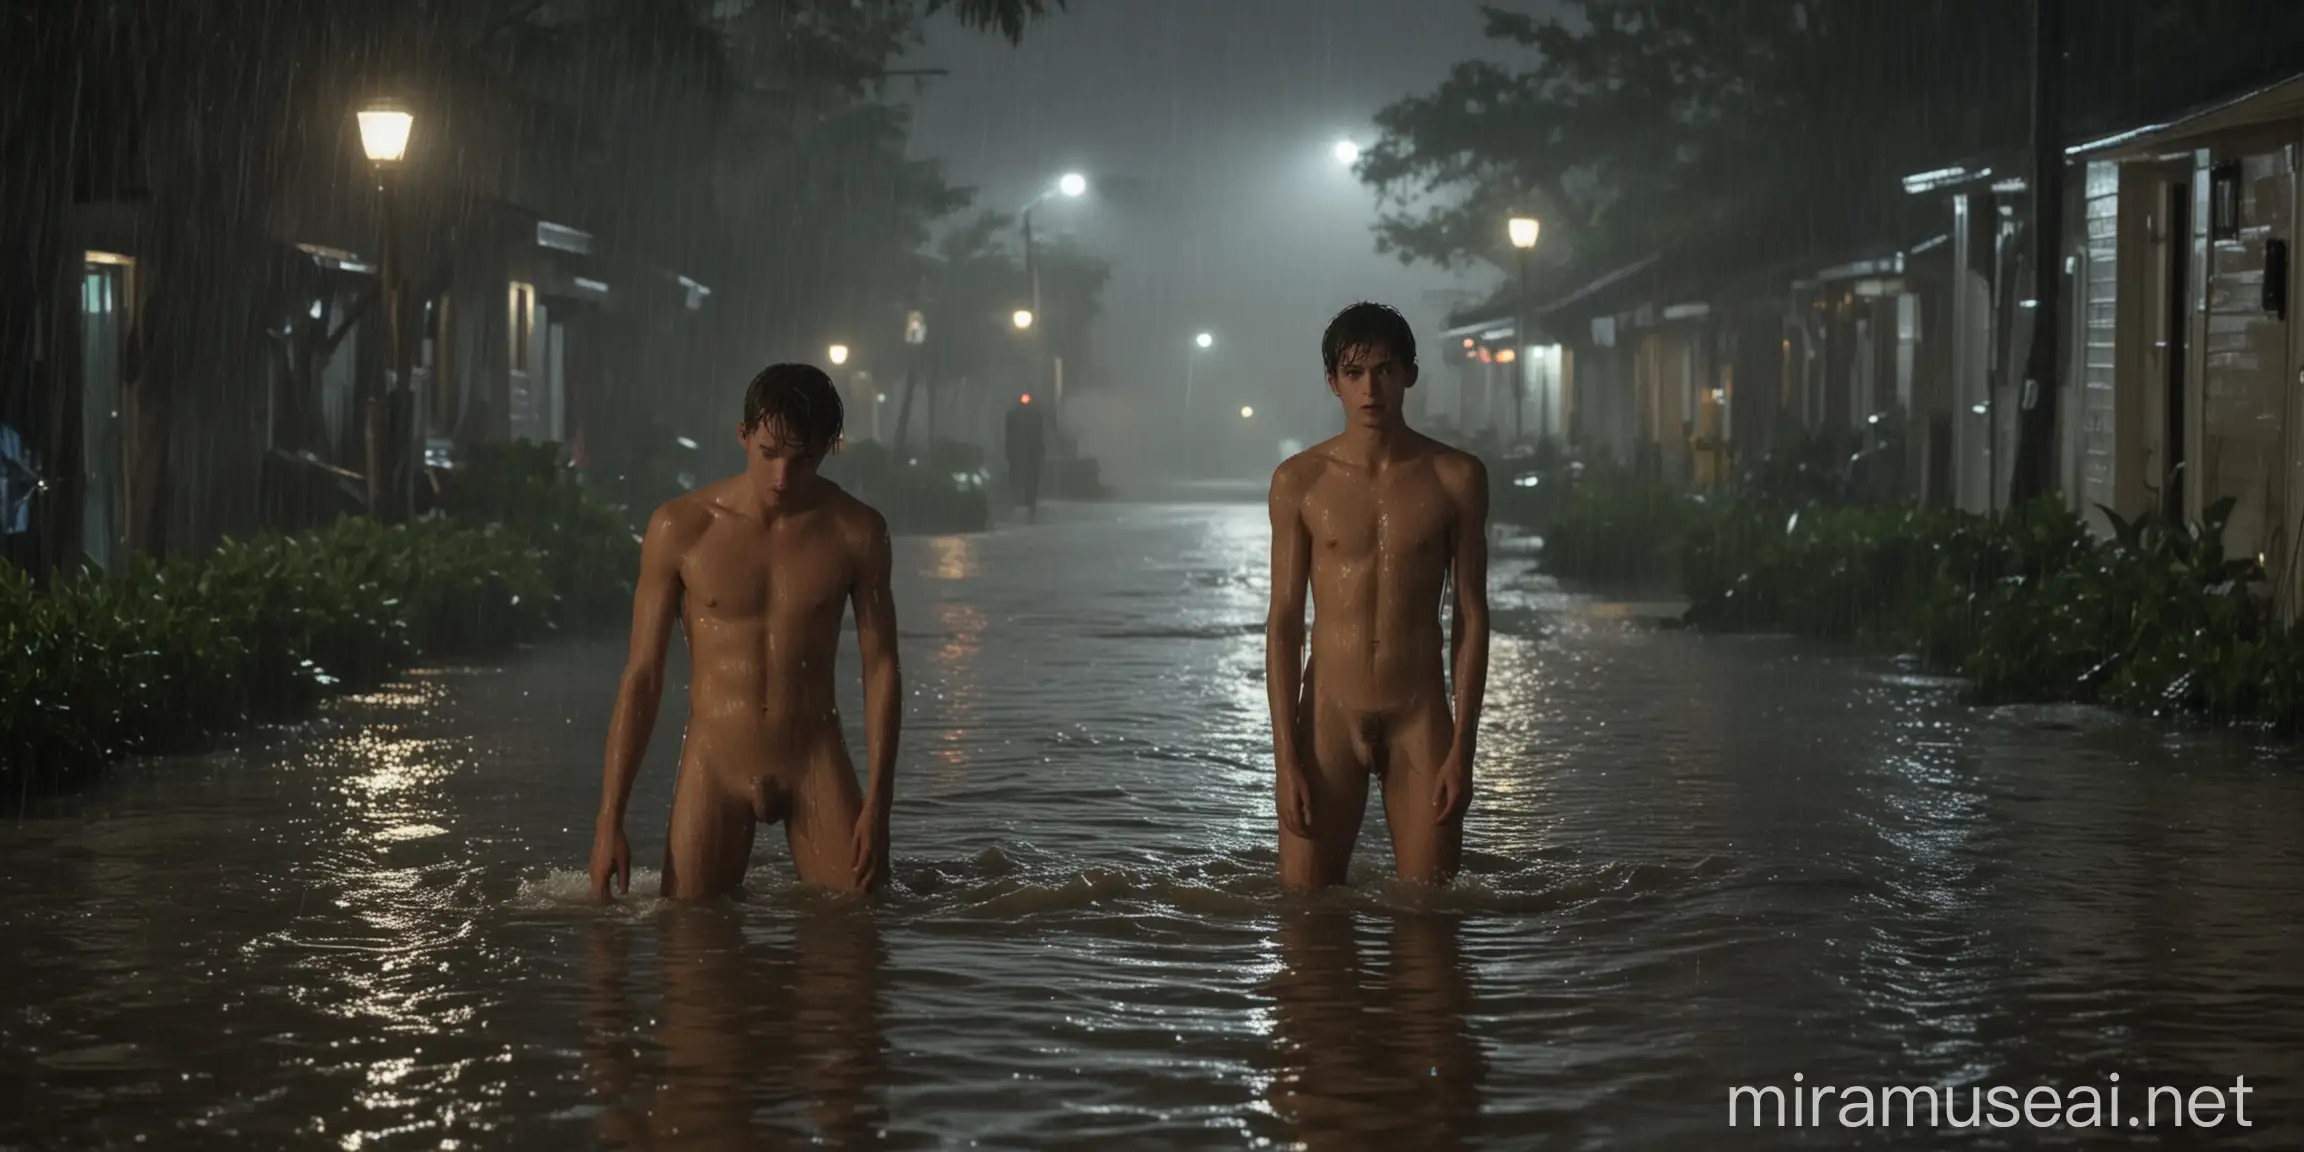 Nighttime Surfing in Flooded Street During Heavy Rain and Lightning